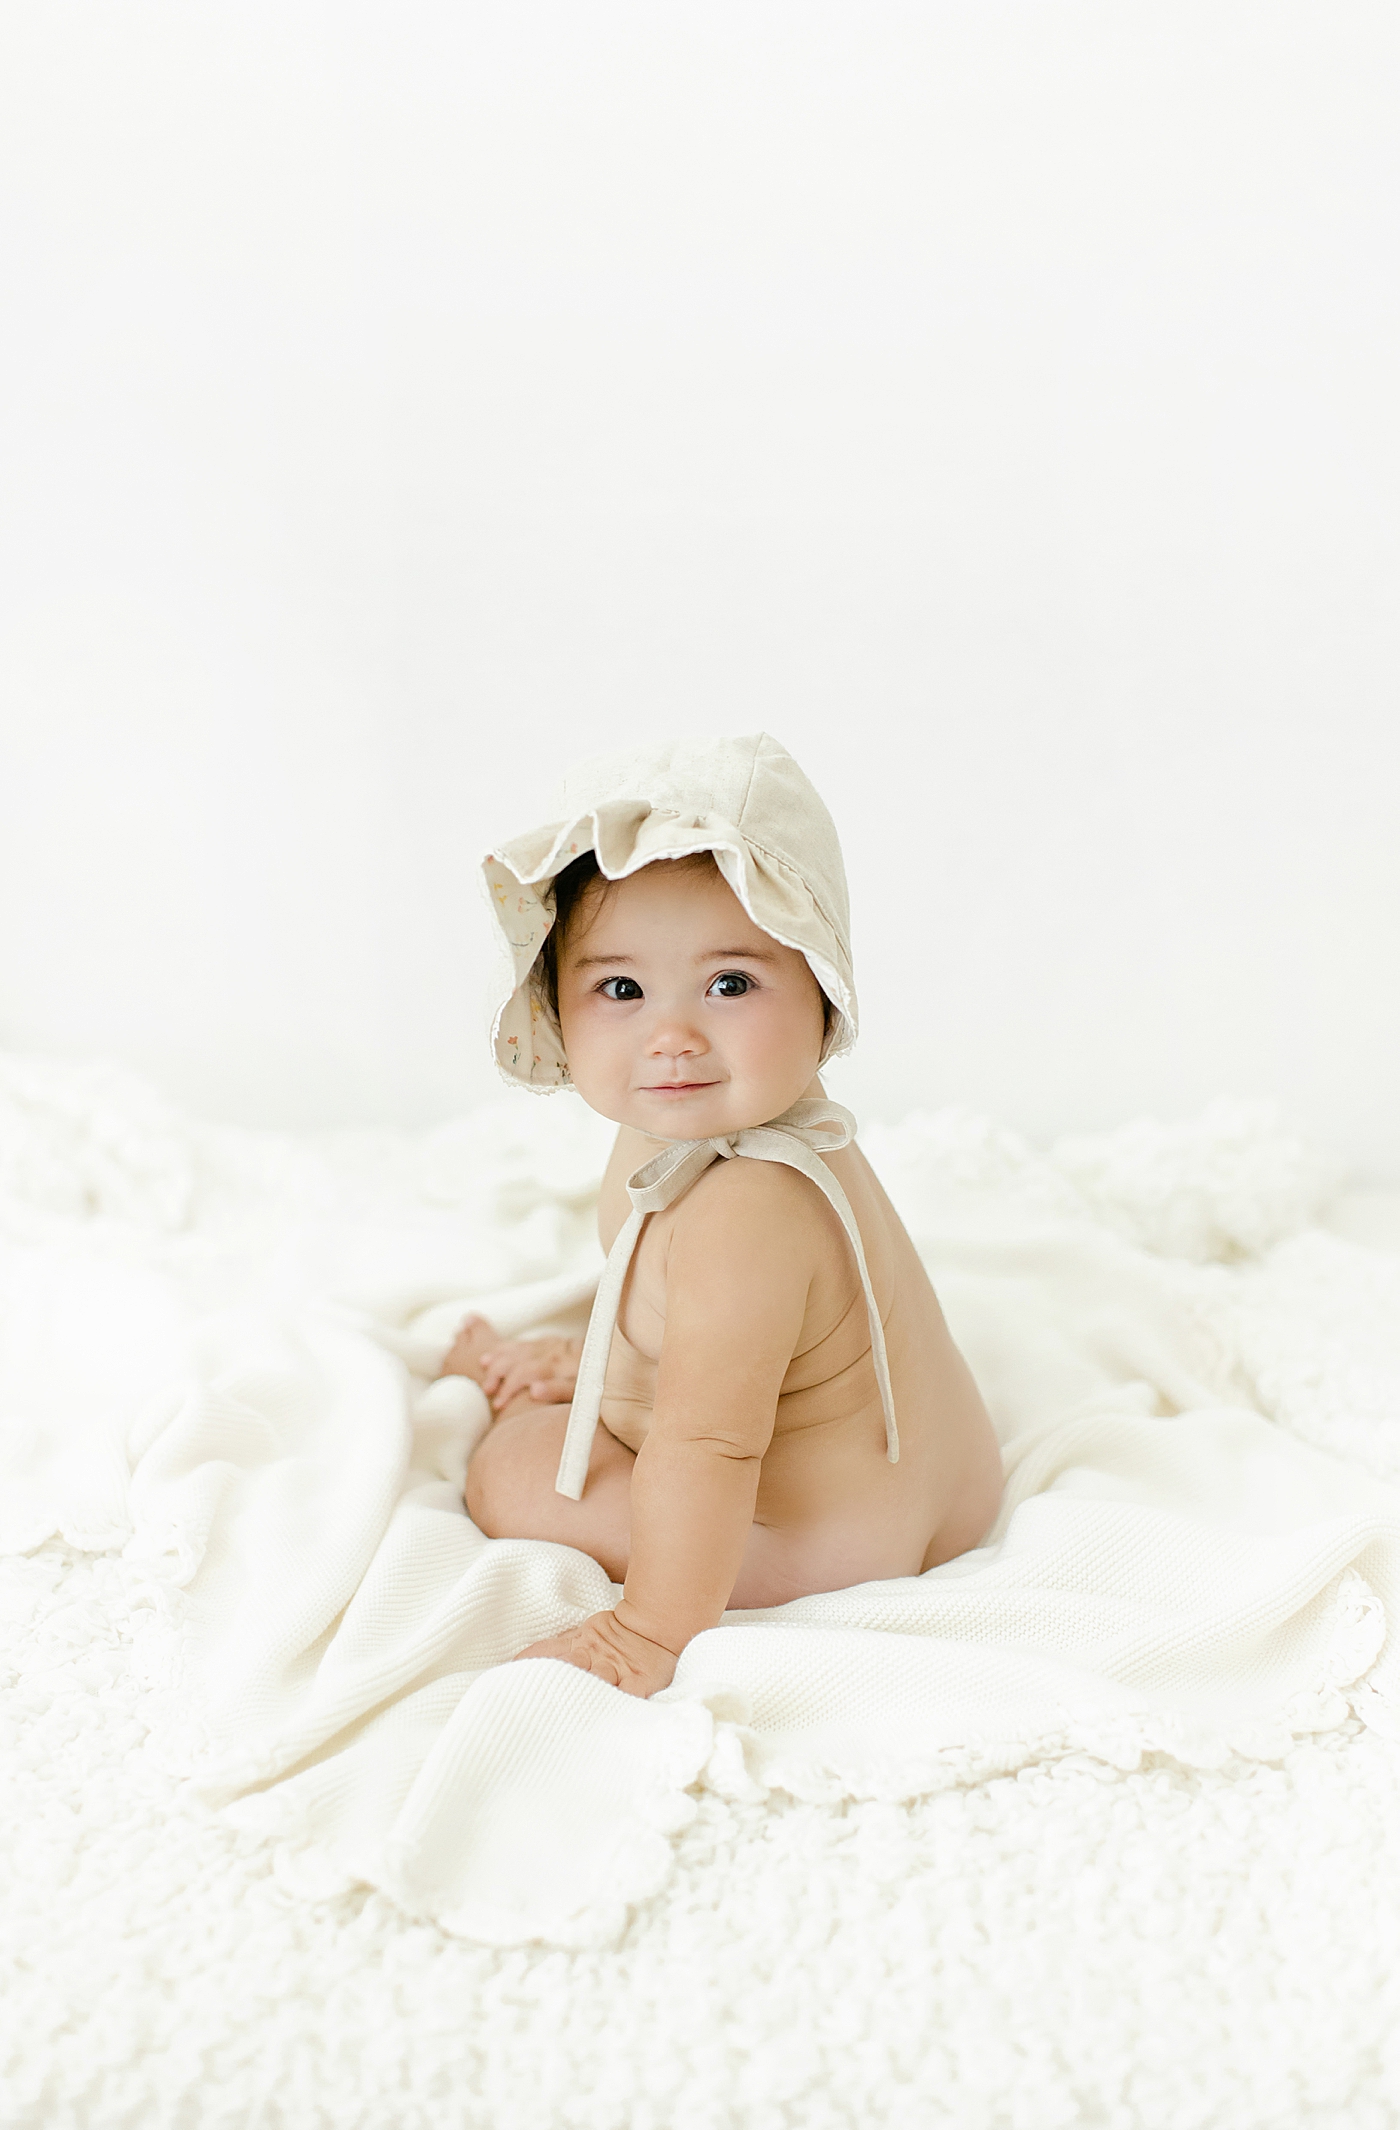 during her Six Month Studio Session | Image by Chrissy Winchester Photography